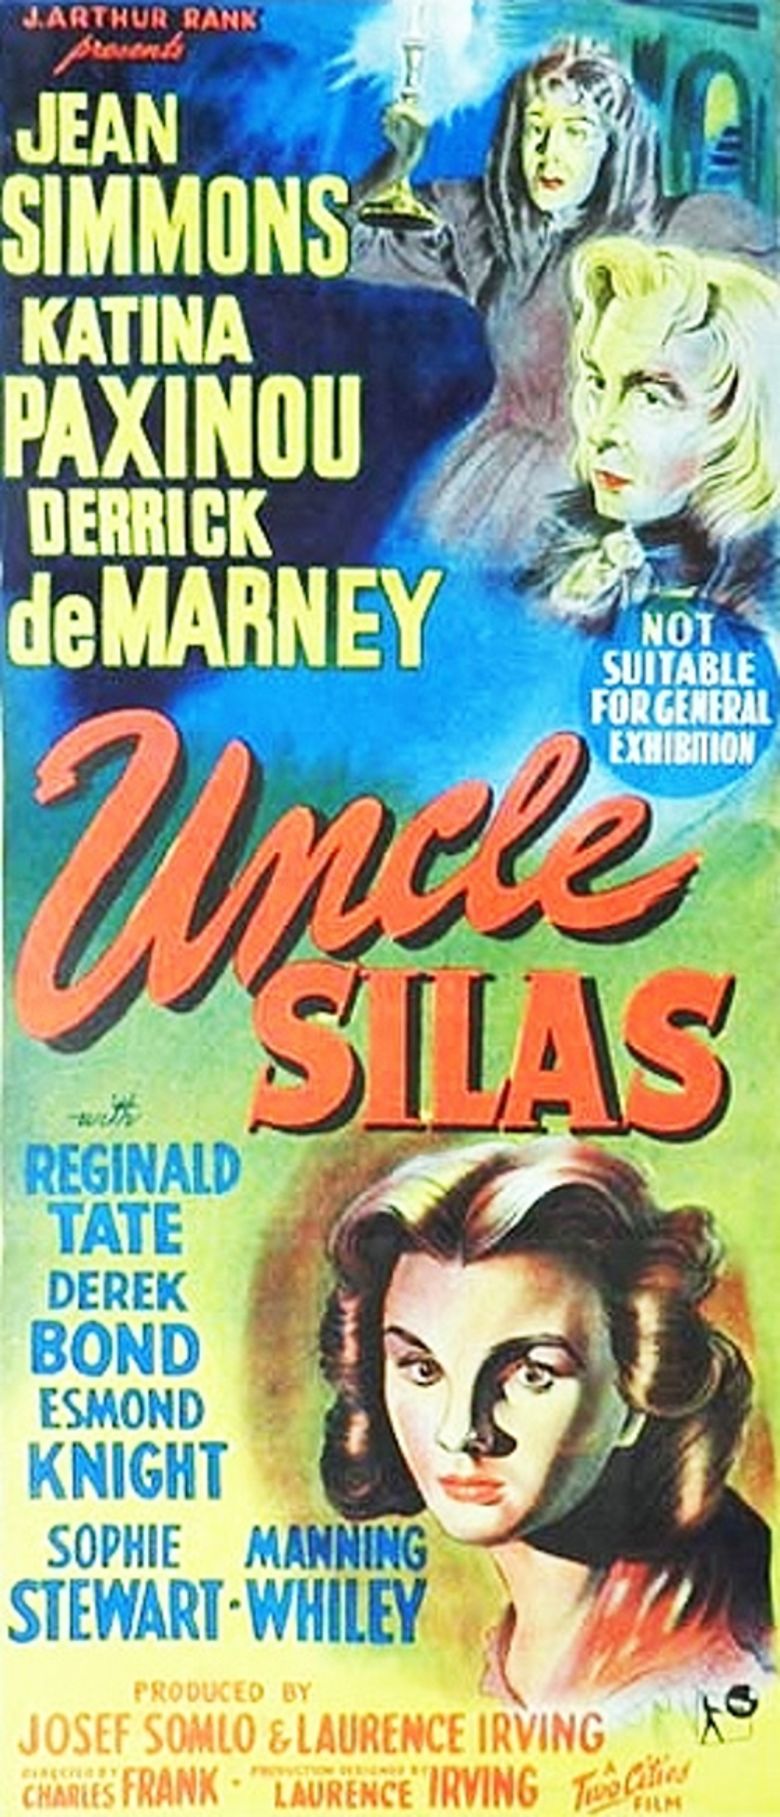 Uncle Silas (film) movie poster